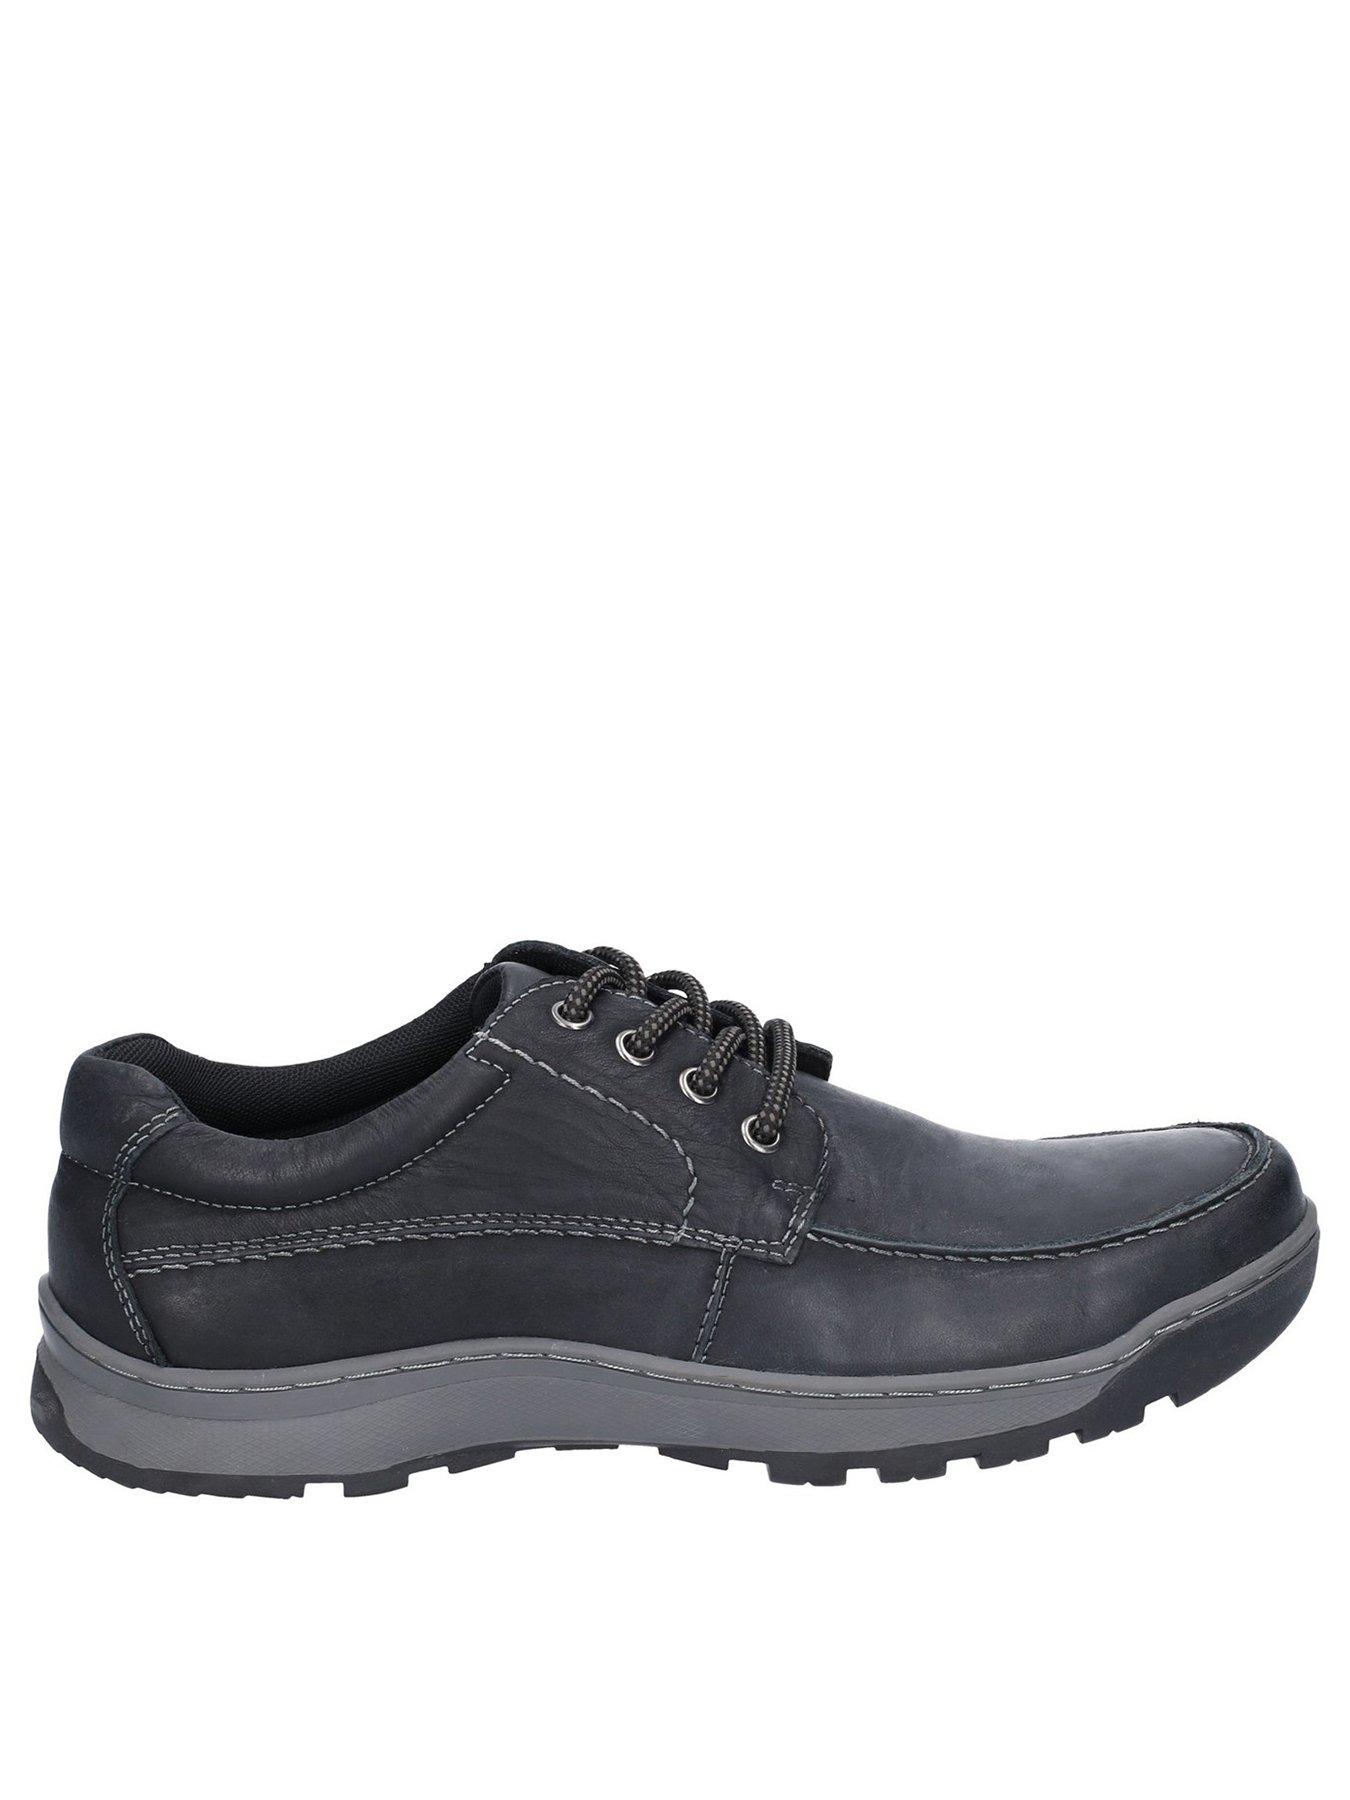 Hush Puppies Tucker Lace Up Shoes - Black | very.co.uk